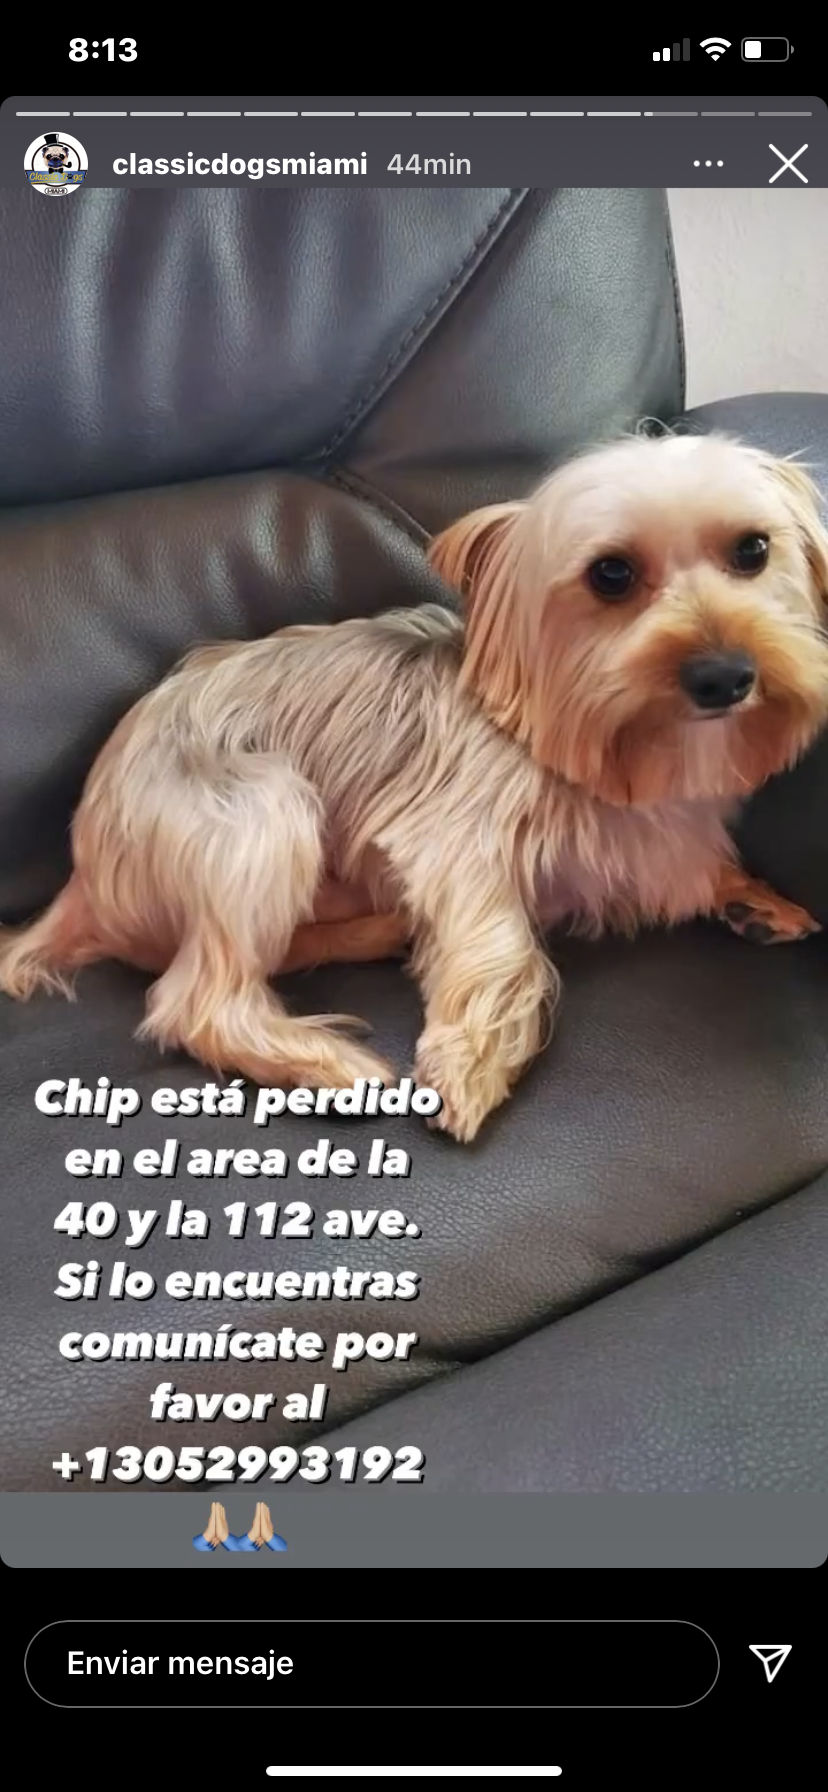 Image of chip, Lost Dog